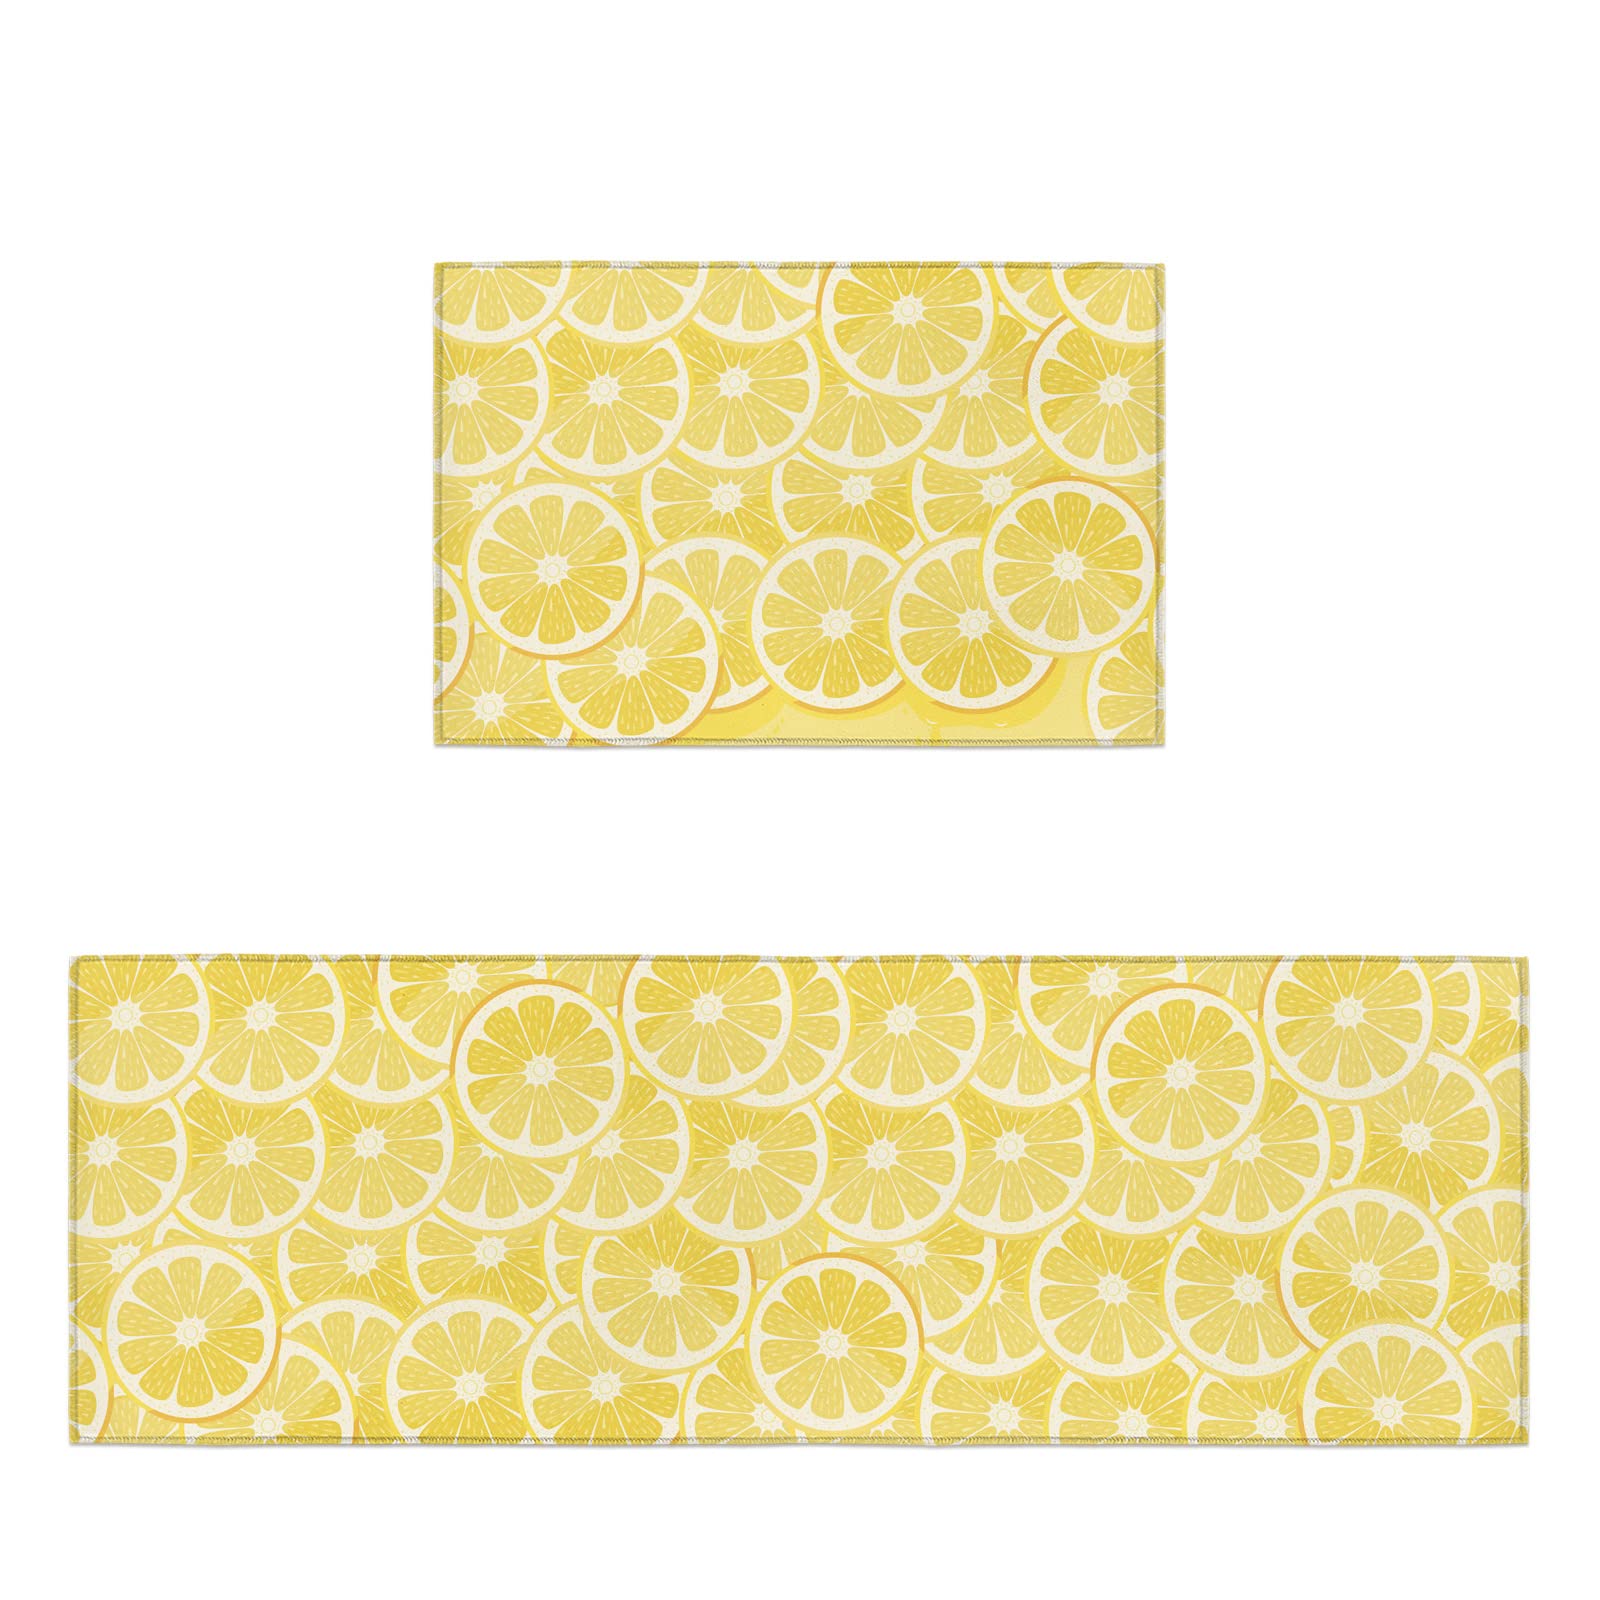 Cute Lemon Yellow Kitchen Rug and Runner Sets 2 Piece Non-Slip Bath Mats and Rugs Spring Summer Fruit Decorative Area Runners Rubber Backing Carpets Floor Sink Doormat